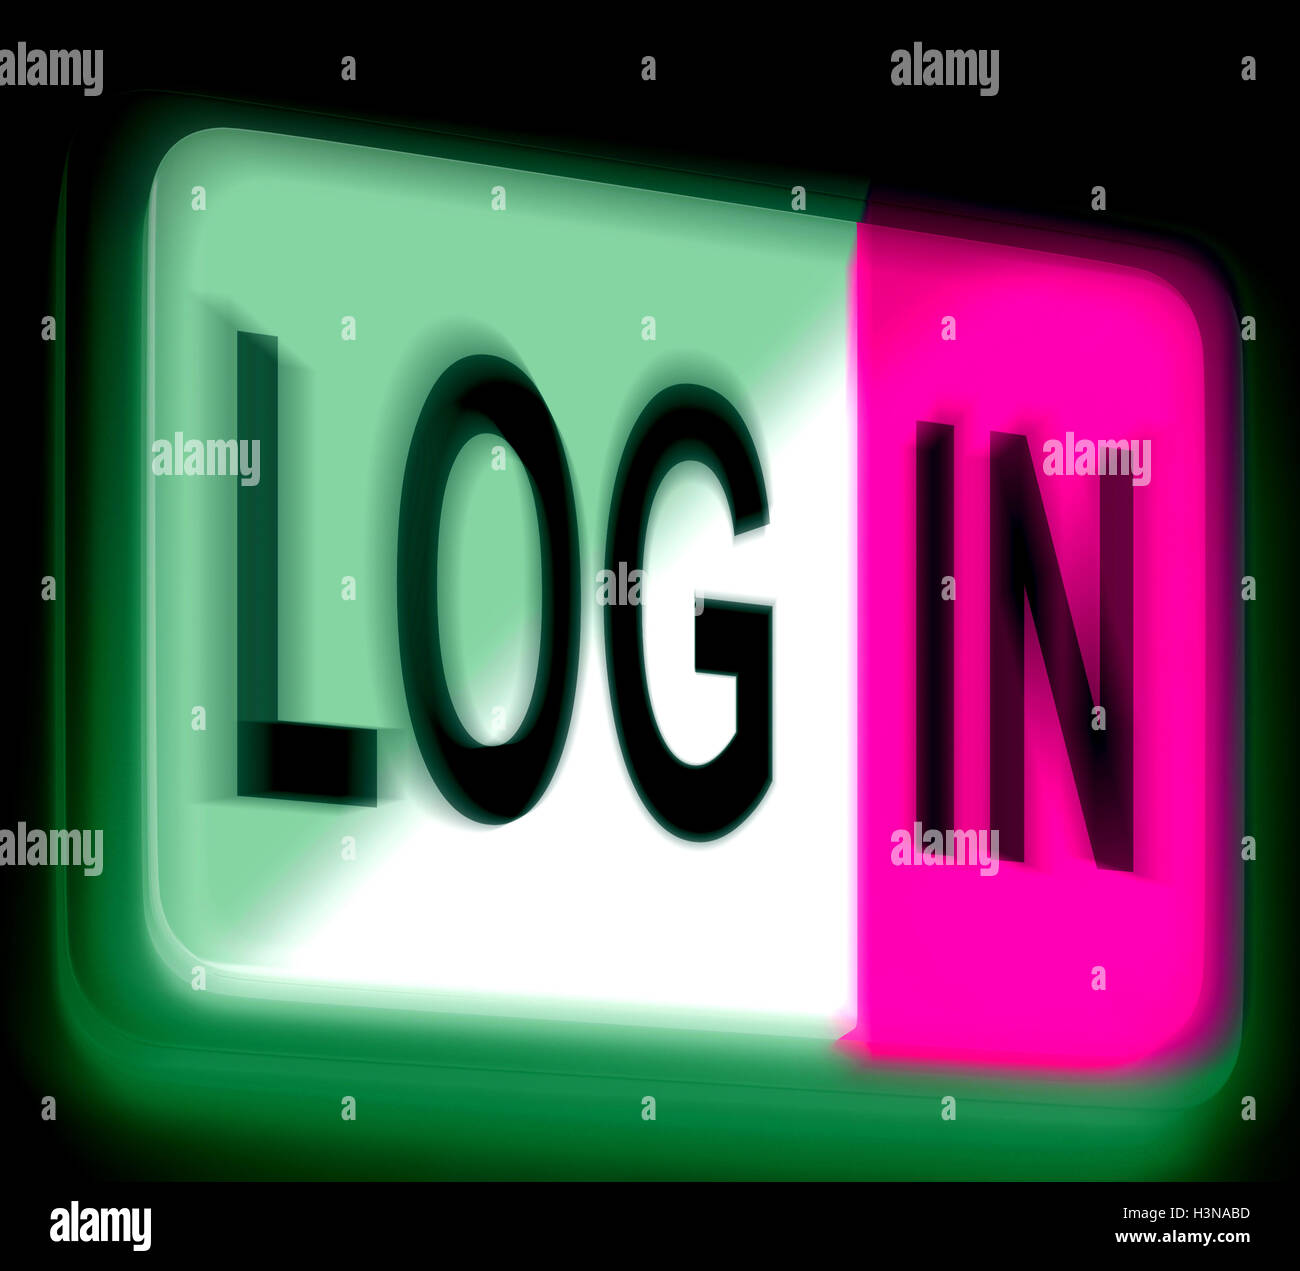 Log In Login Sign Shows Sign In Online Stock Photo